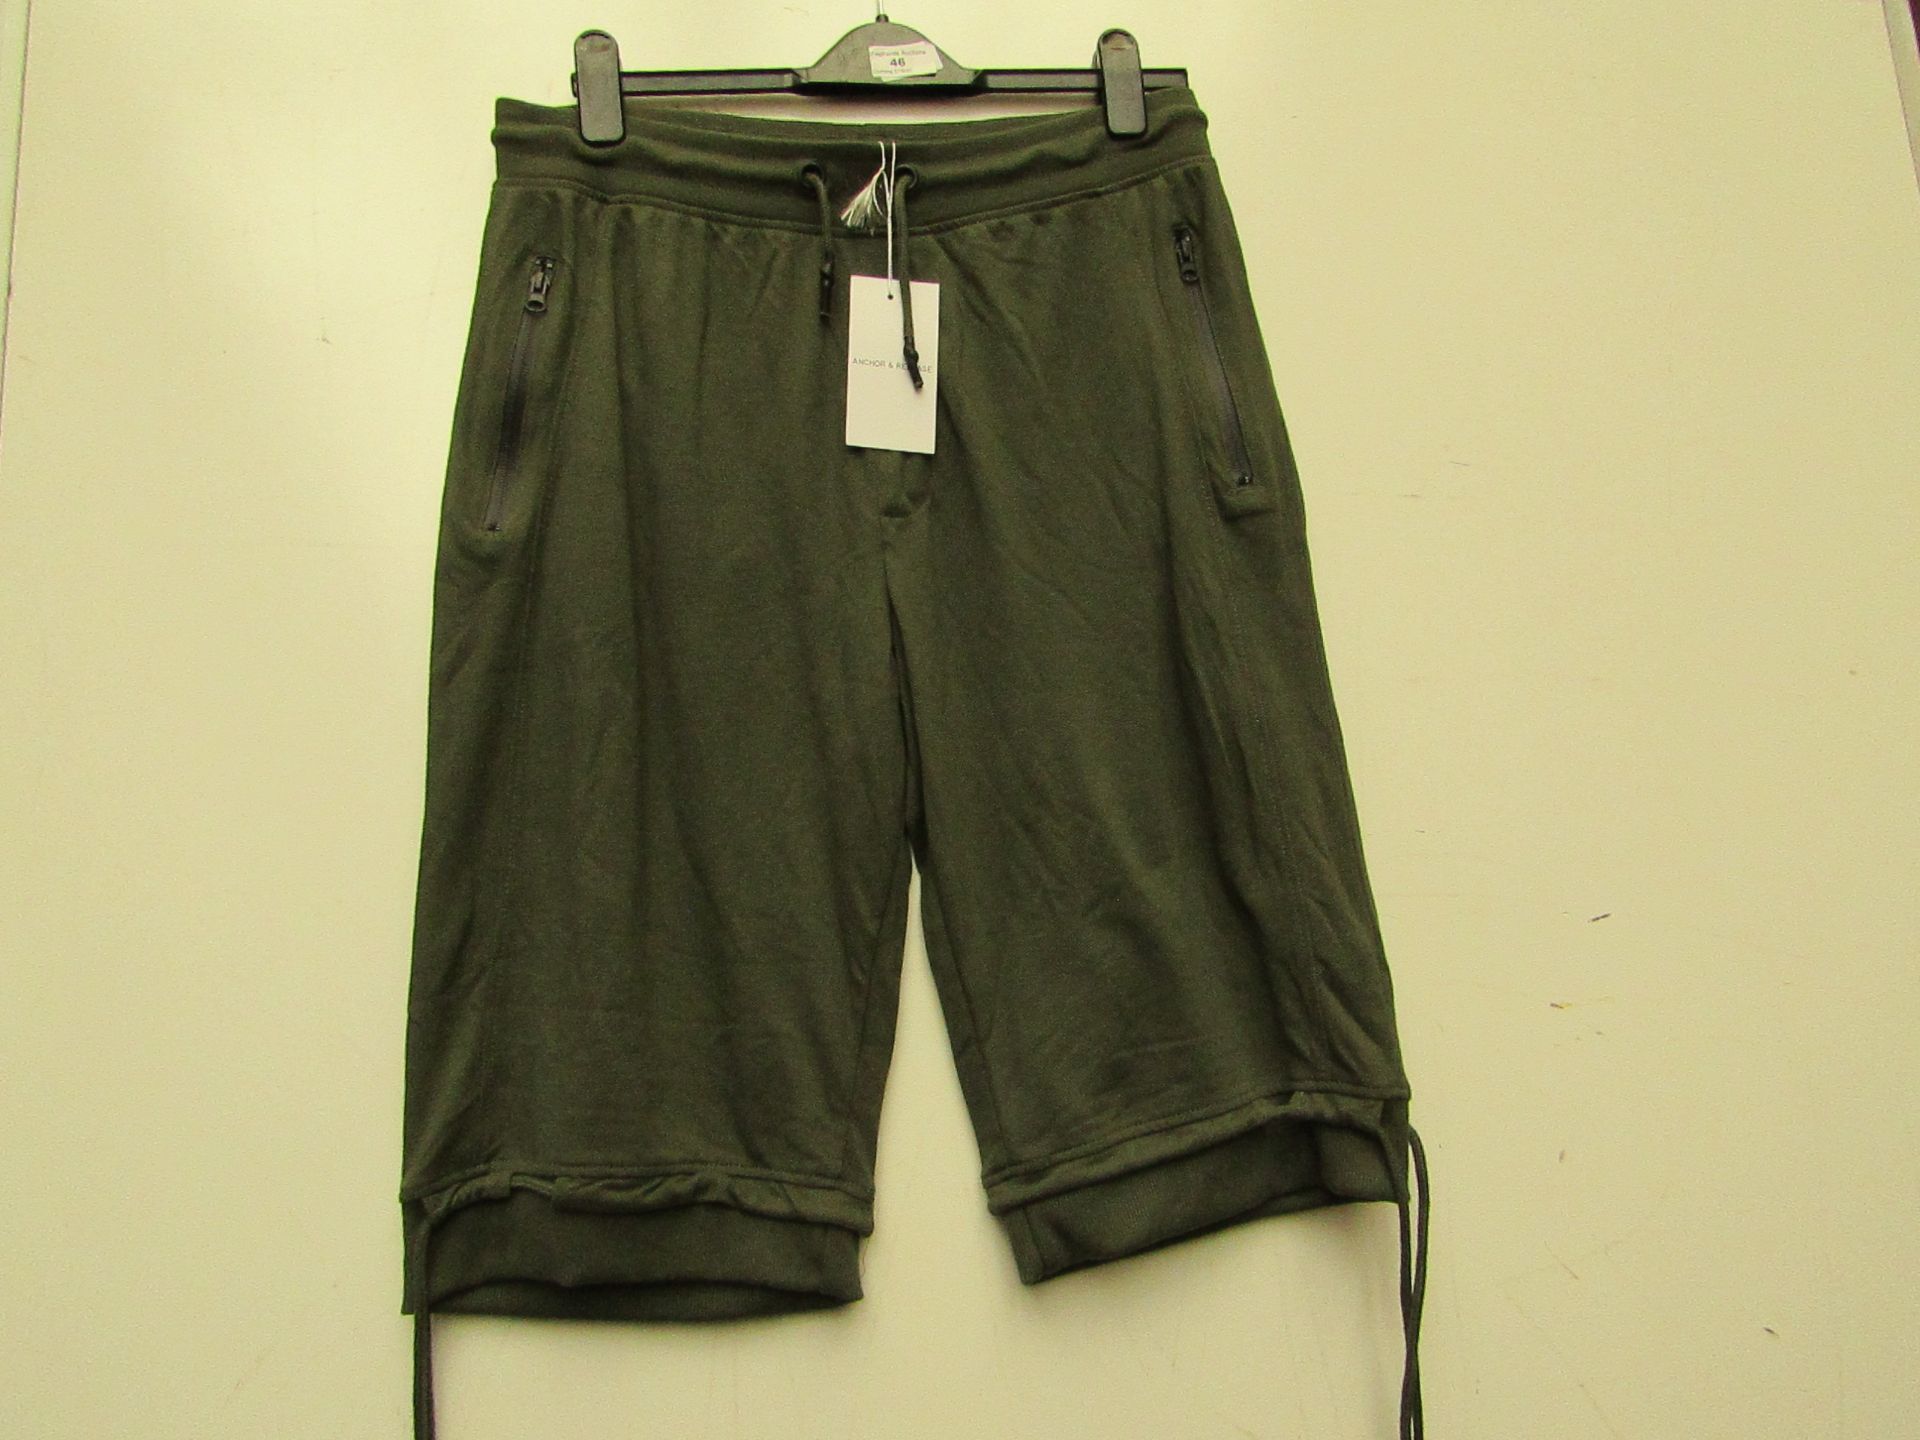 Anchor & Release Mens Khaki Jersey Knee Length Shorts size L new with tag see image